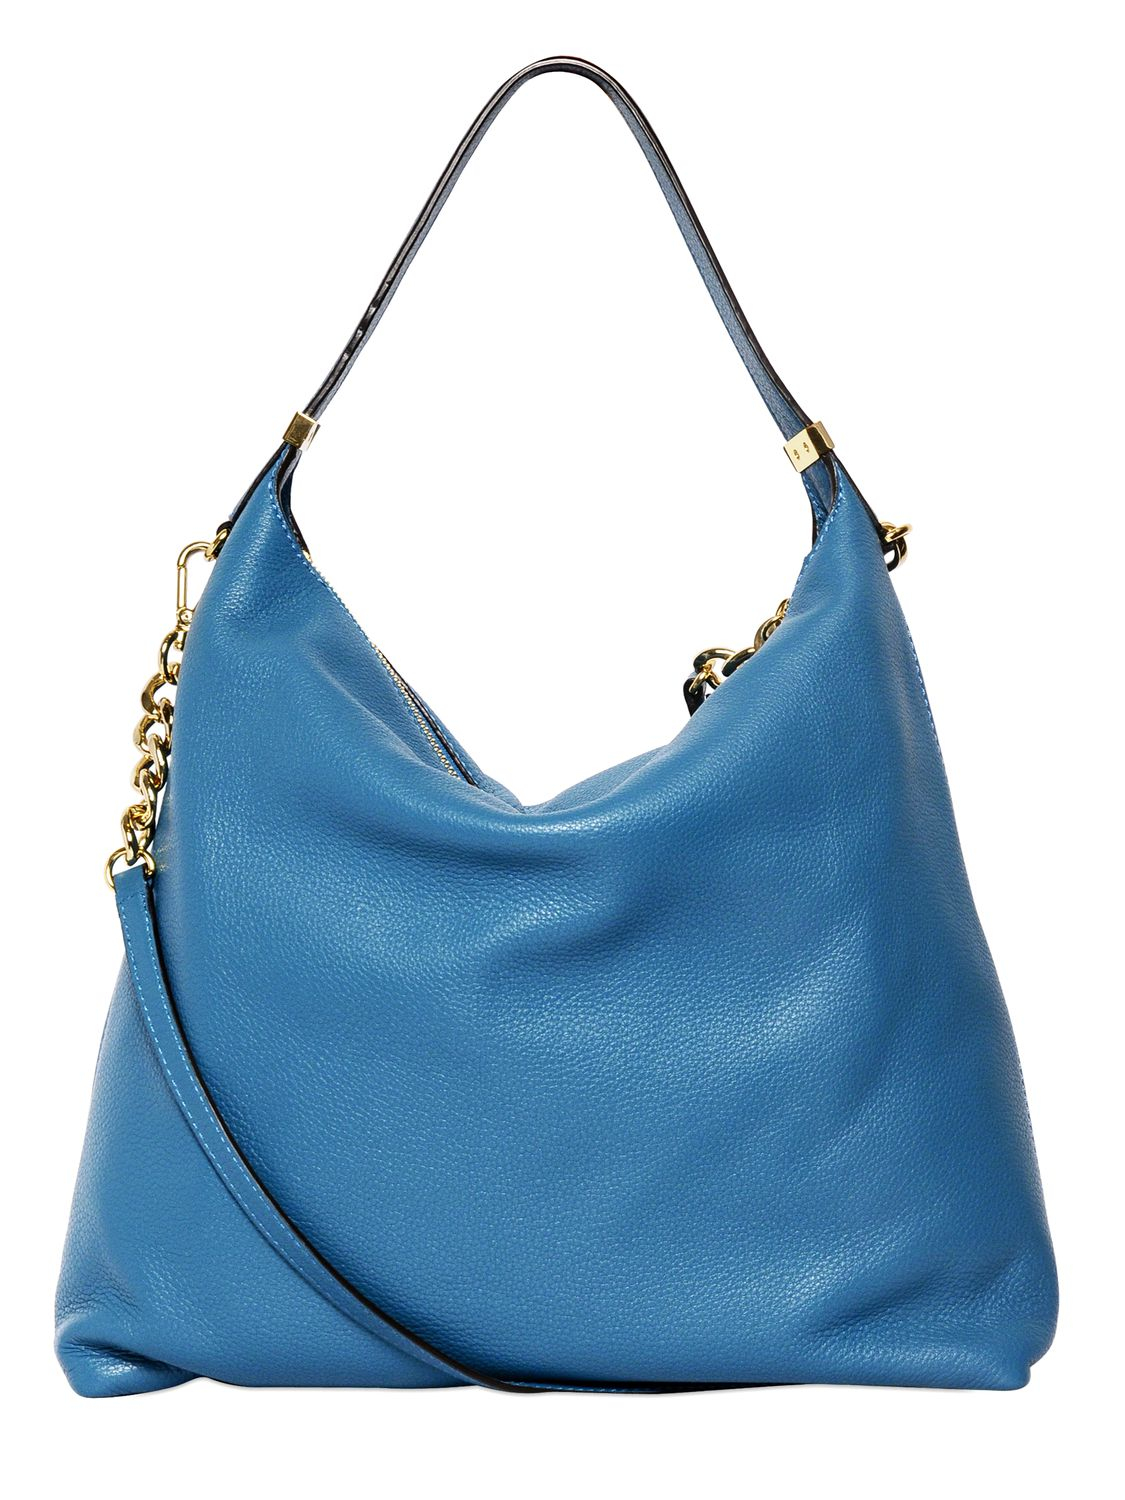 Michael michael kors Weston Grained Leather Hobo Bag in Blue (turquoise ...